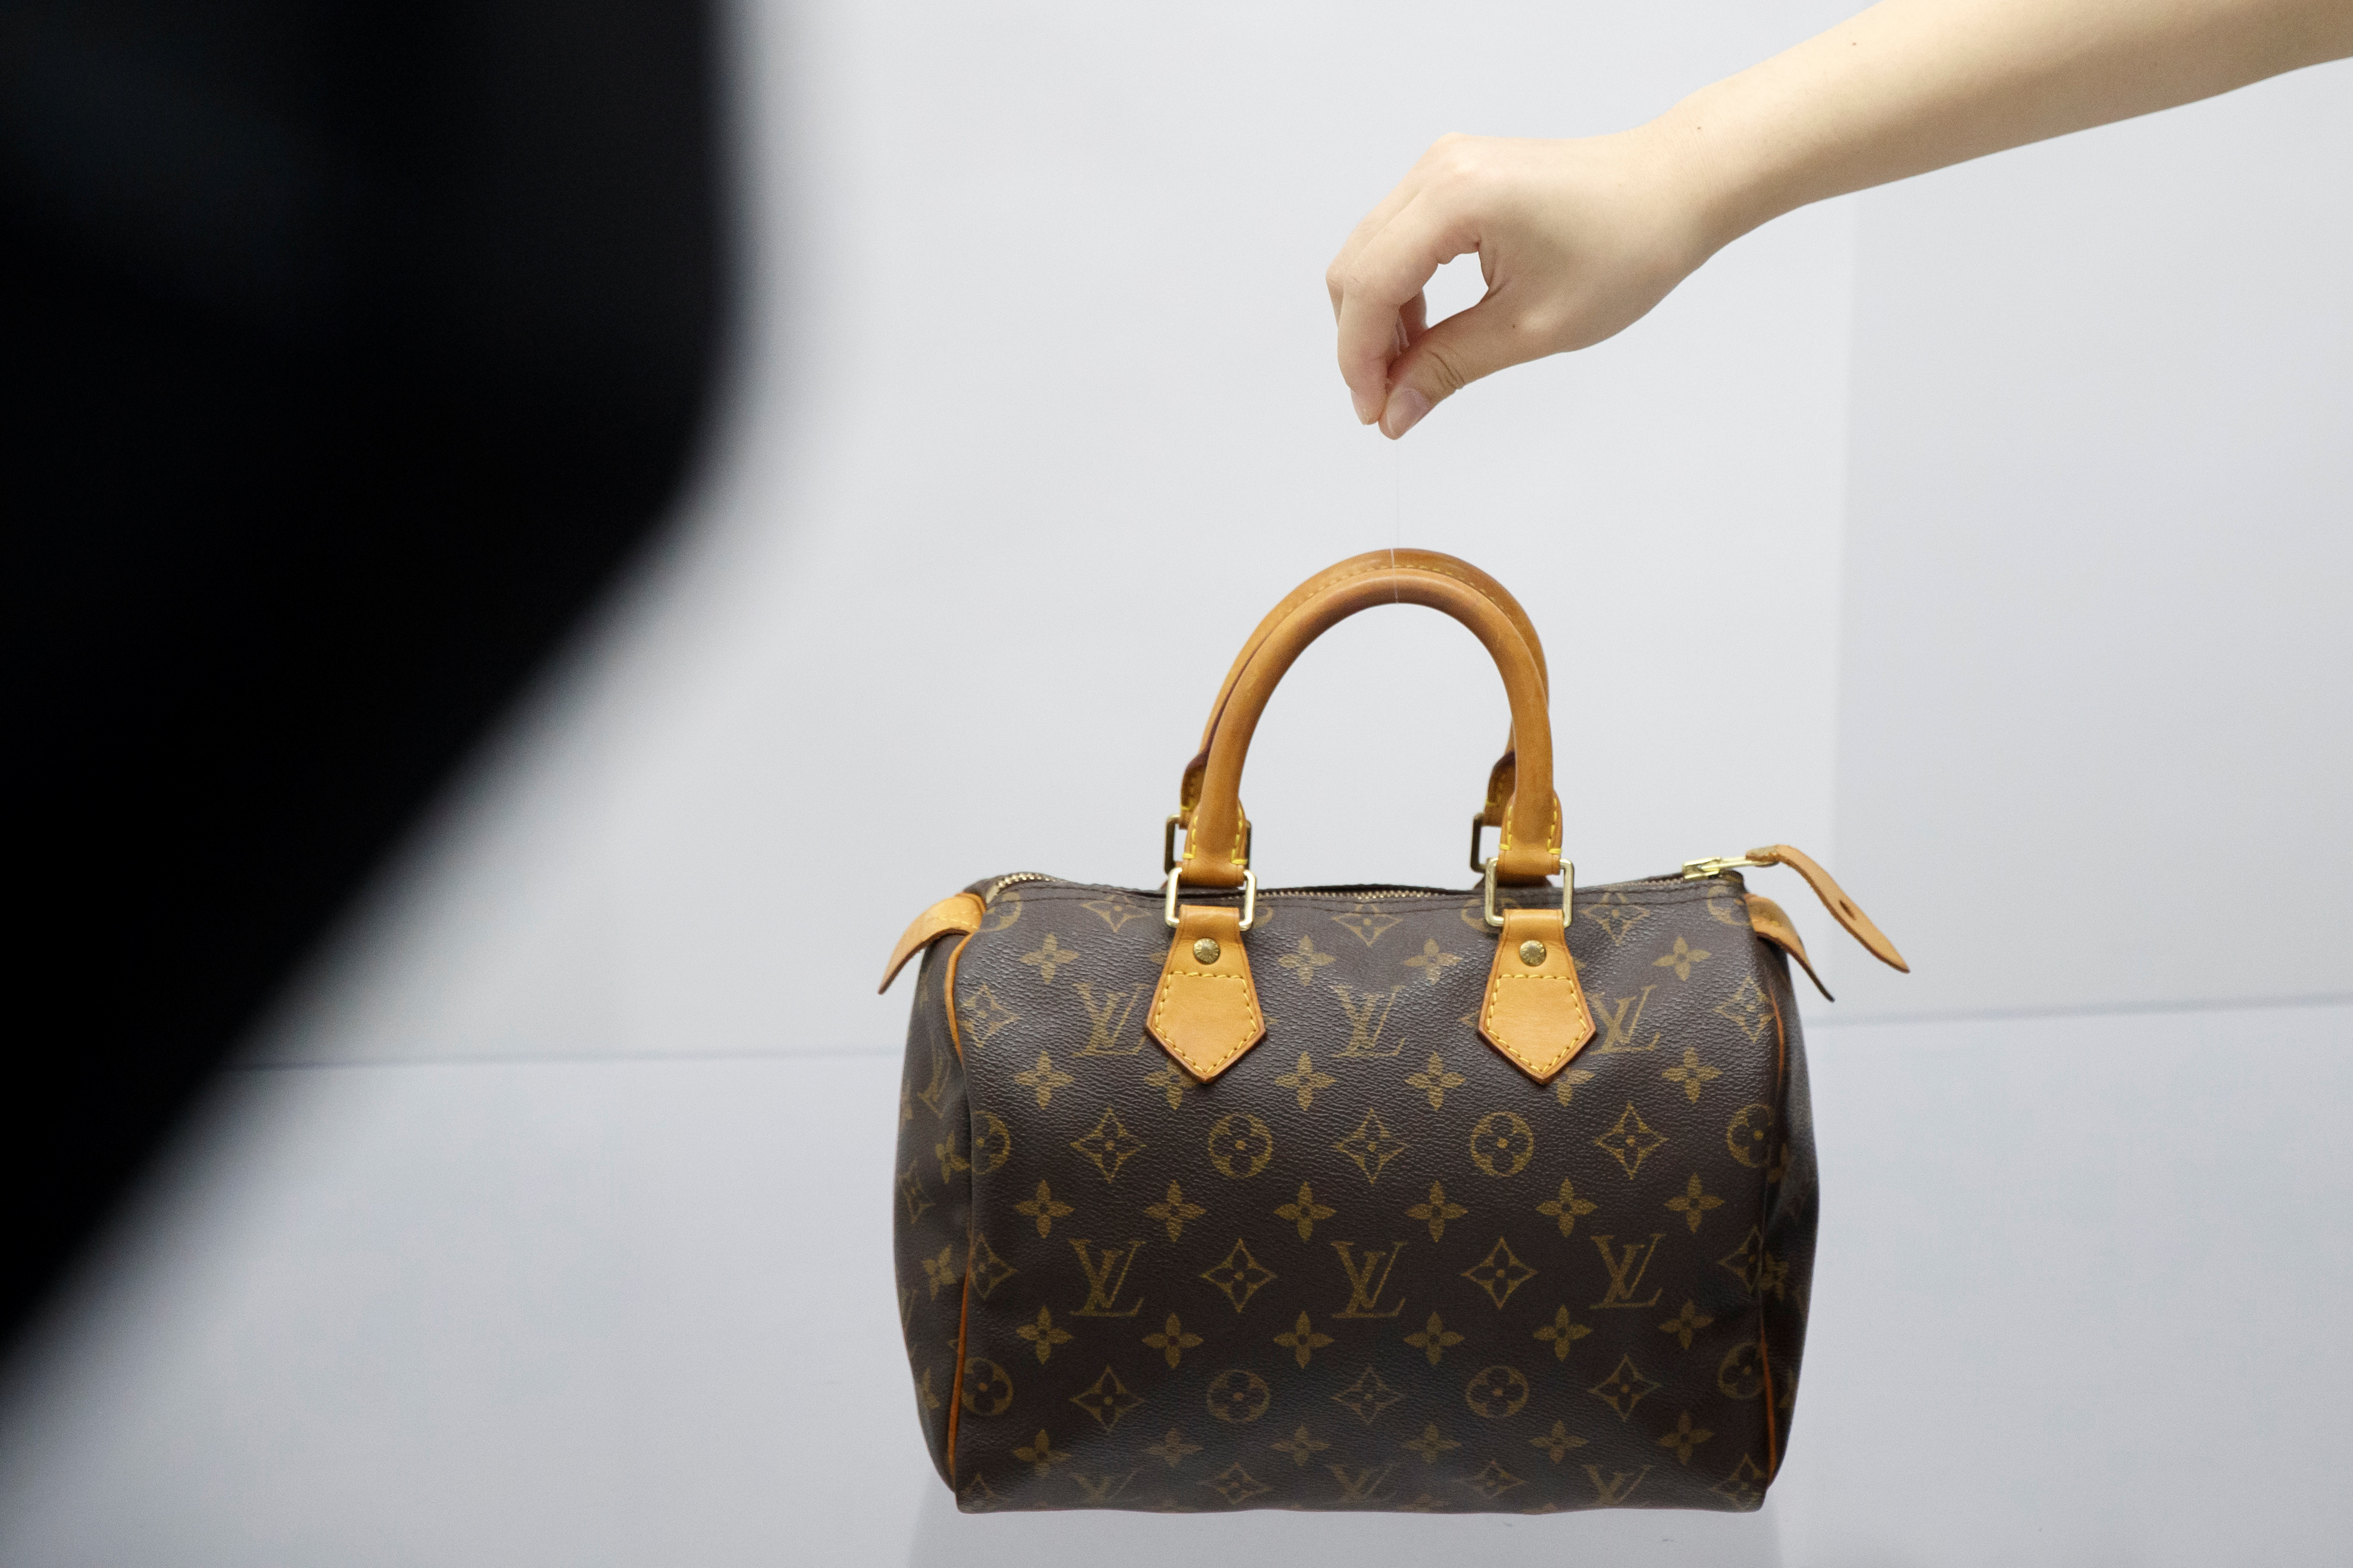 Looking to Buy Authentic Louis Vuitton Handbags without Breaking the Bank?  The RealReal Has You Covered - Mommy's Block Party